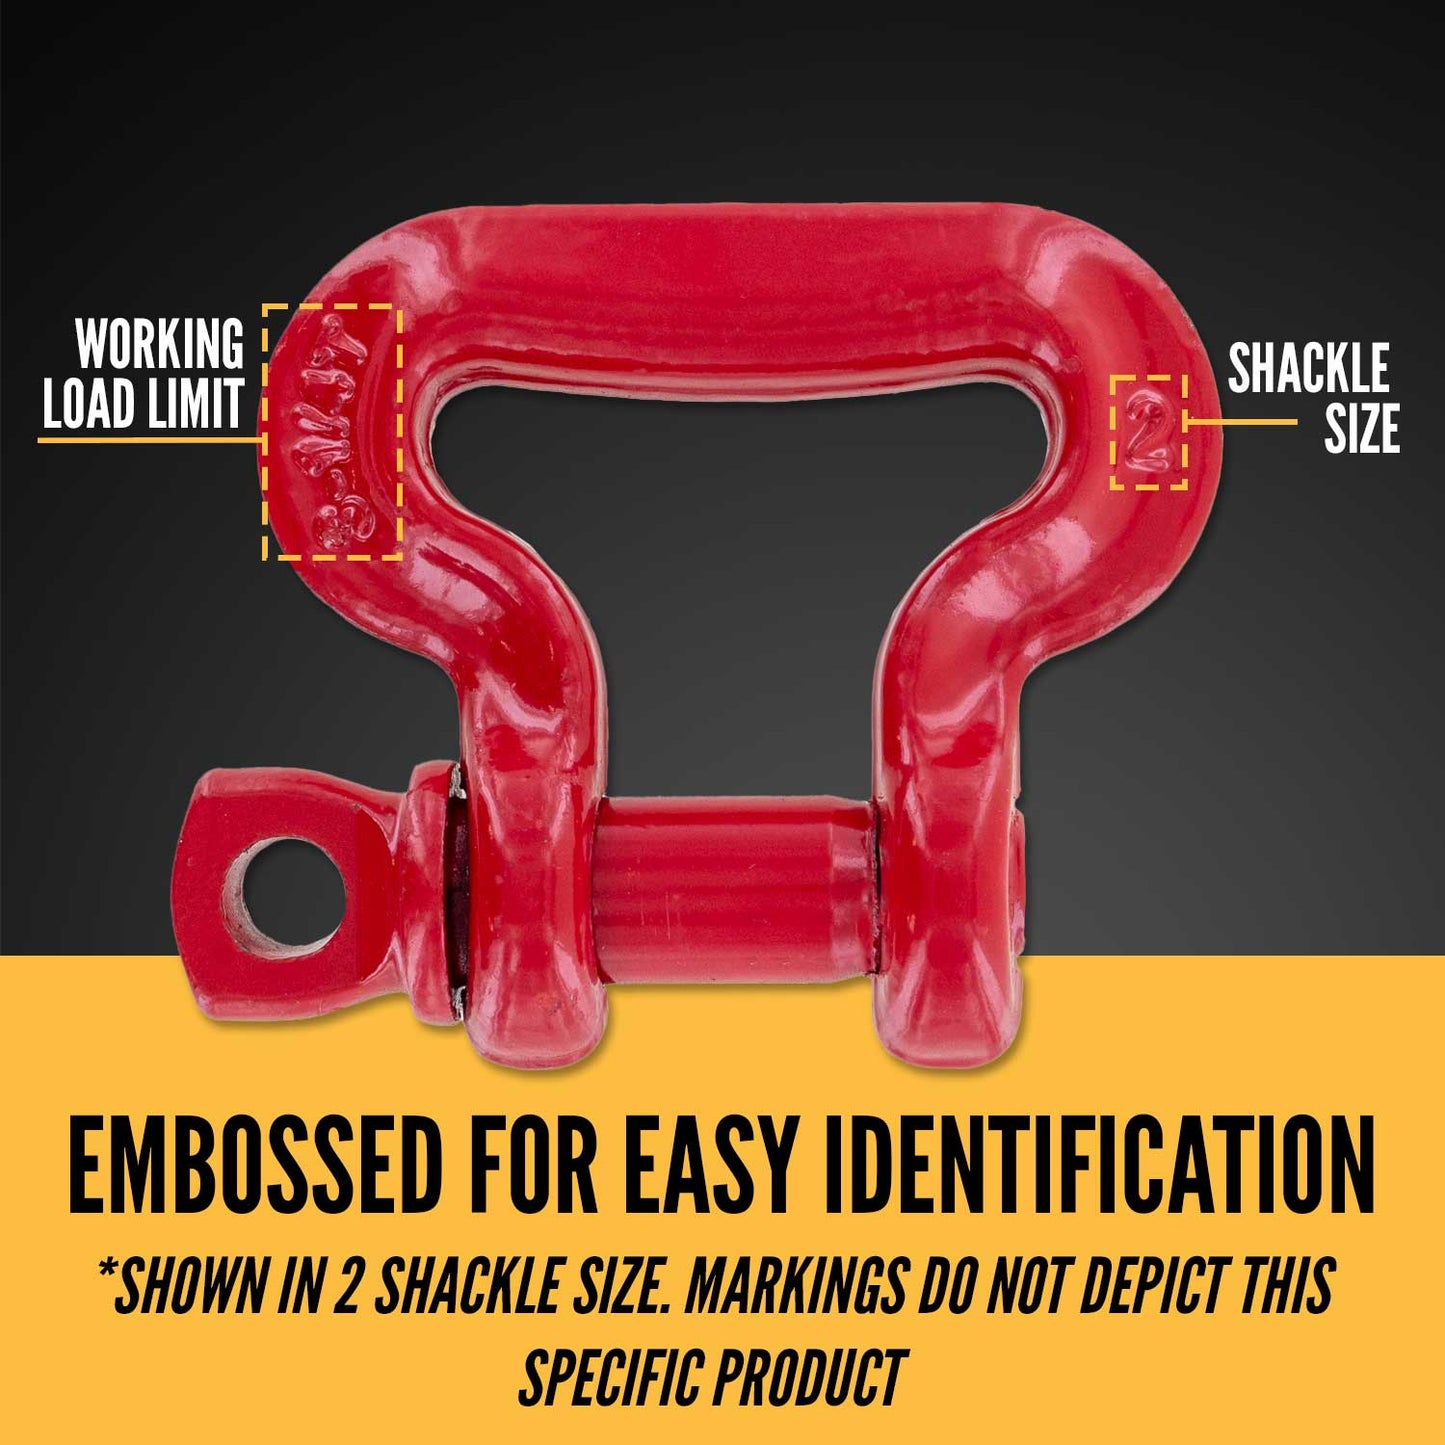 Crosby® Screw Pin Sling Saver Shackle | S-281 - 3.25 Ton embossed for easy identification